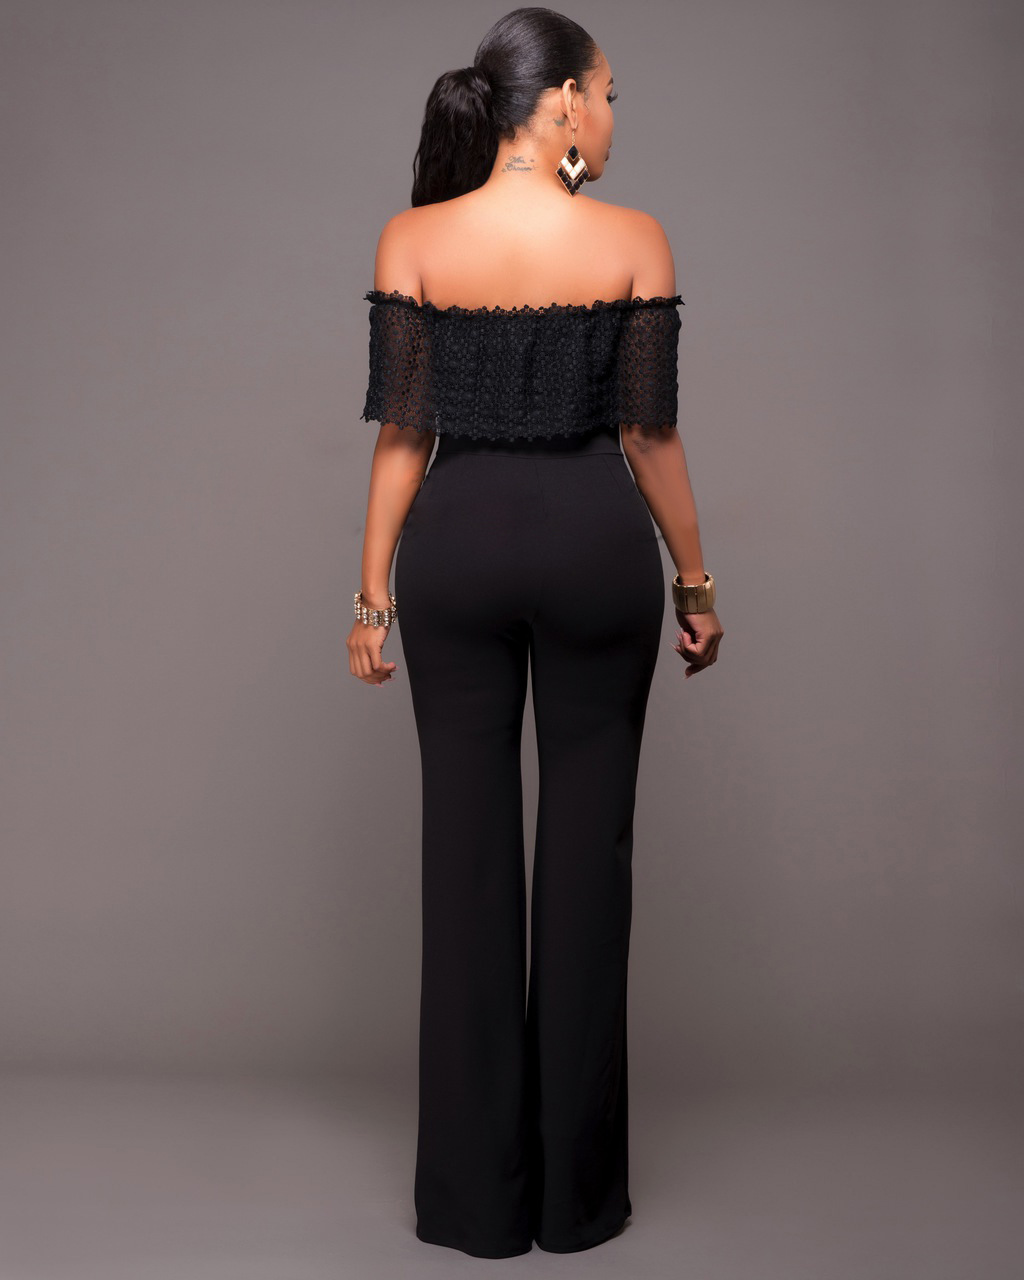 Black Lace Up Ruffle Overlay Strapless Jumpsuit